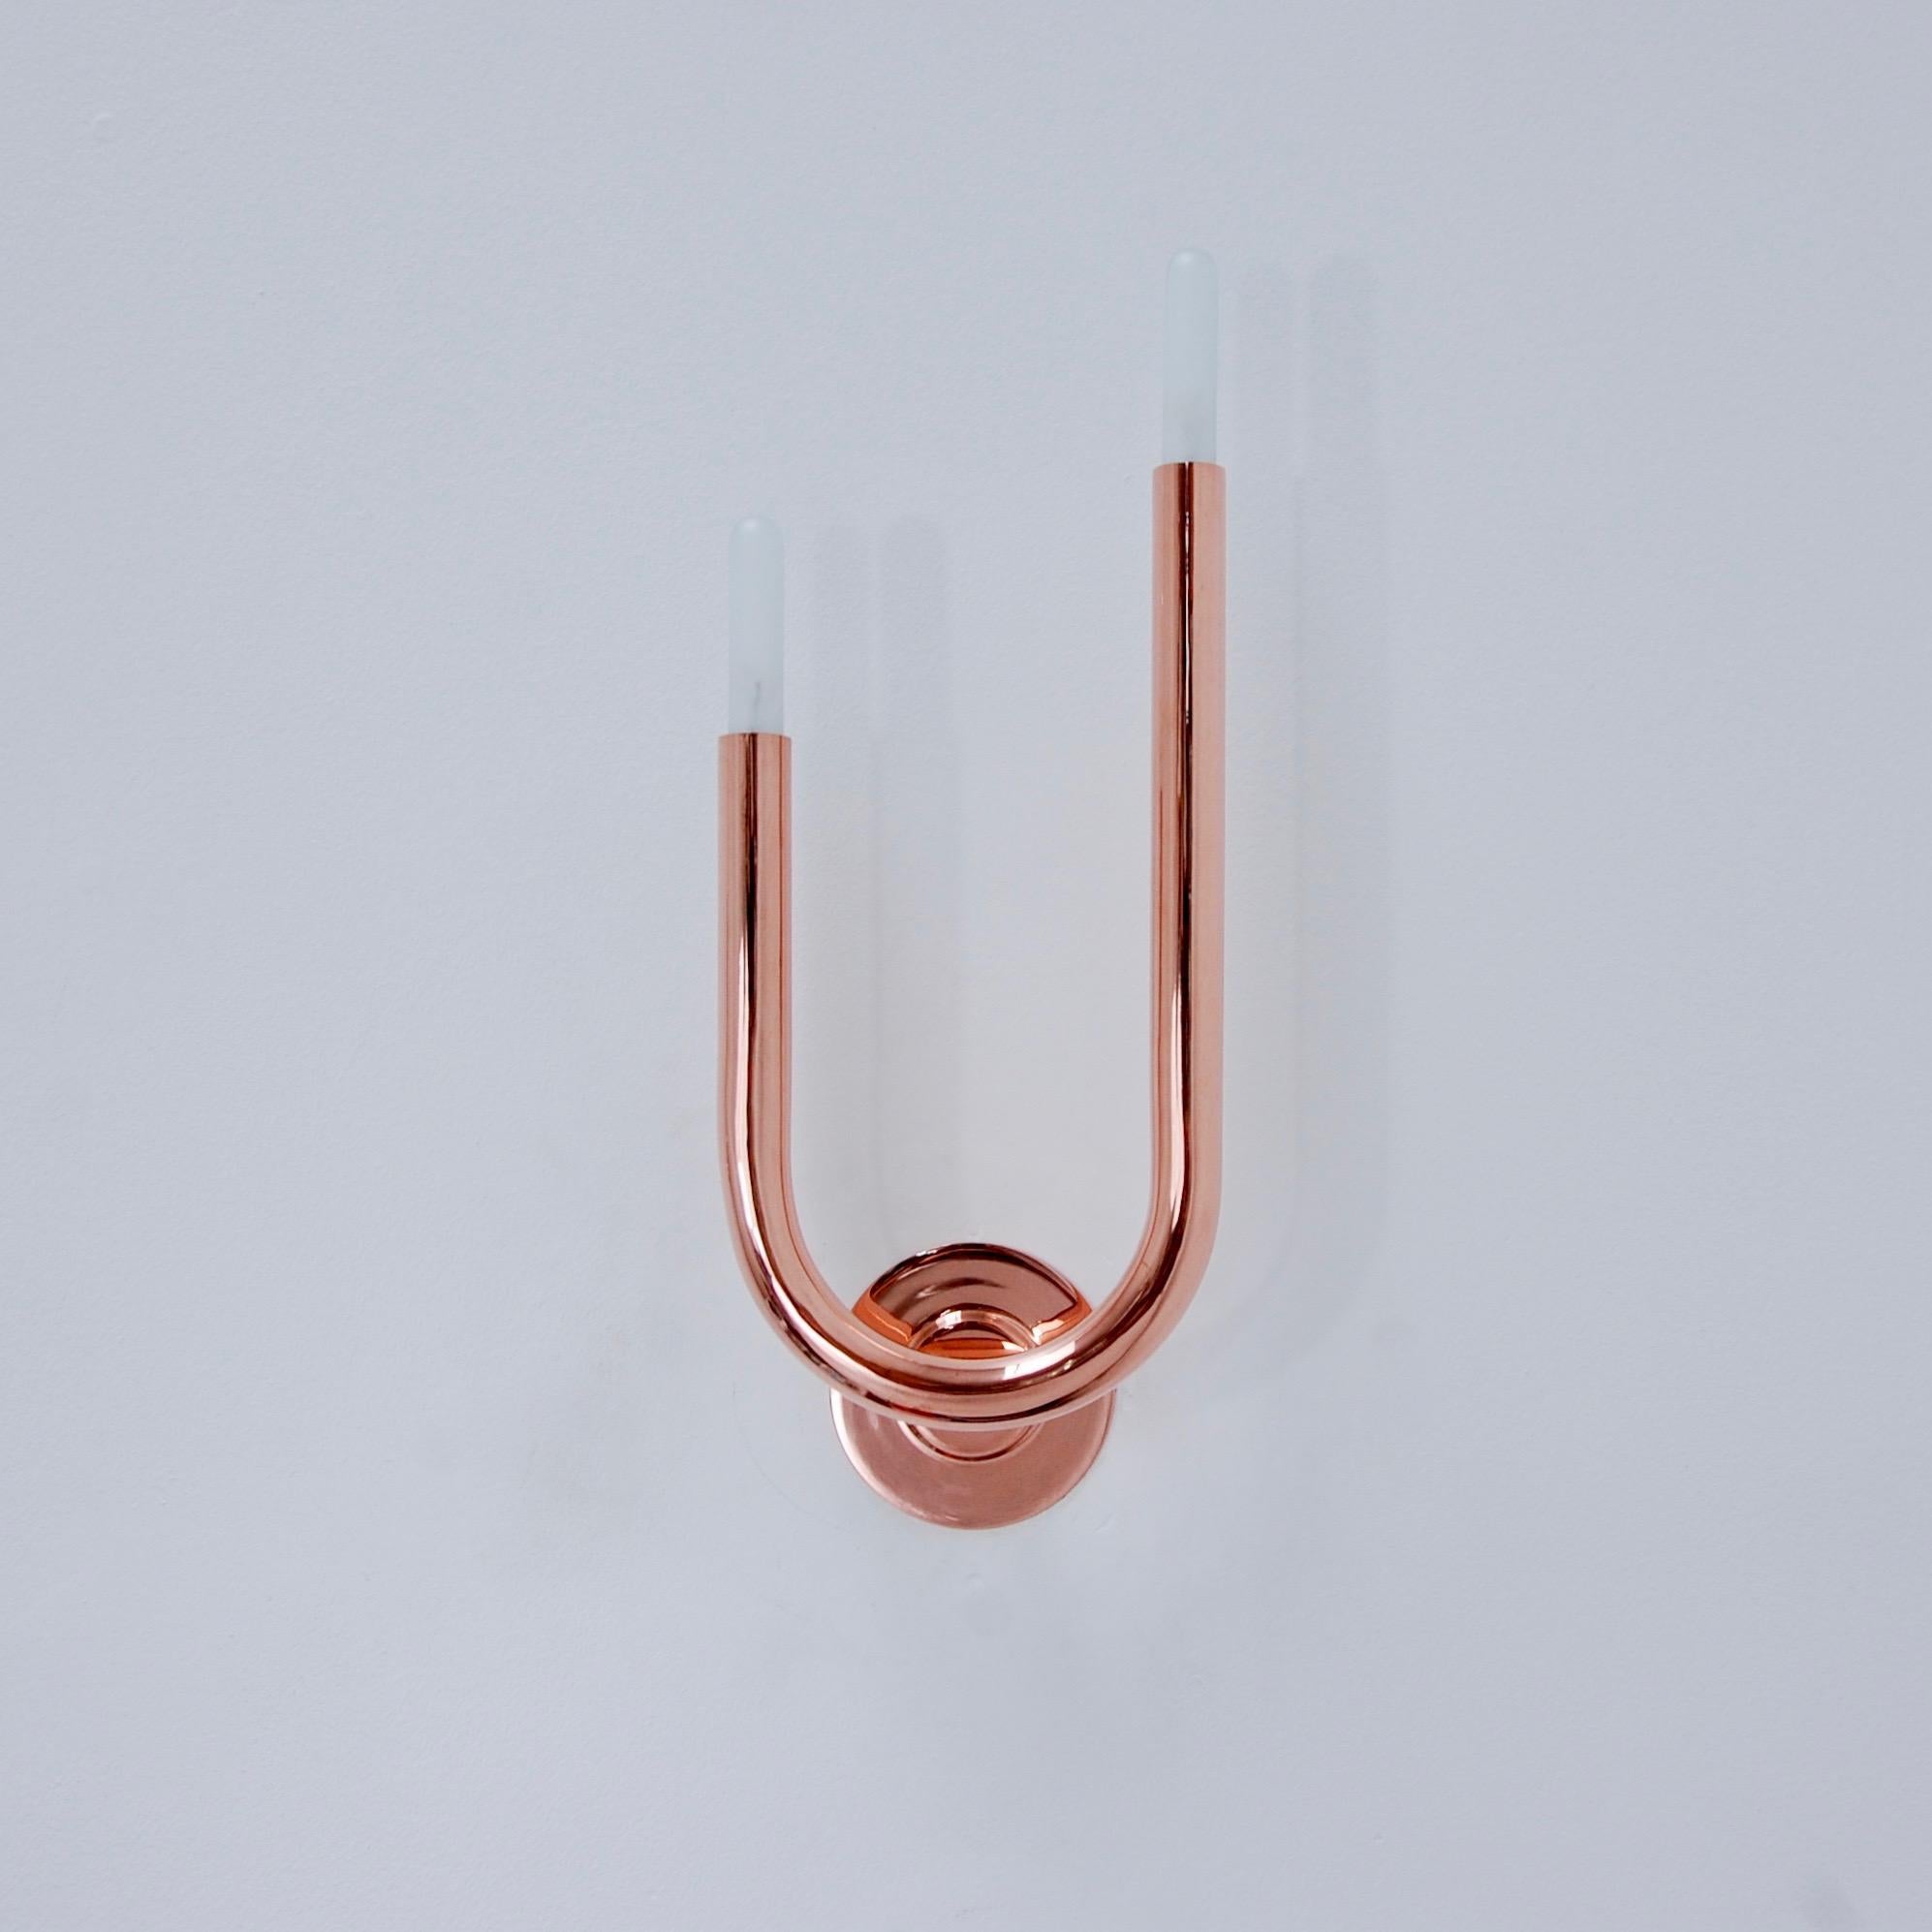 Superb and sleek modern LU wall sconces by Lumfardo Luminaires in polished un-lacquered copper. (2) candelabra E12 based sockets per sconce, 15 watts incandescent light bulb per socket. Light bulbs included with order. Priced as a